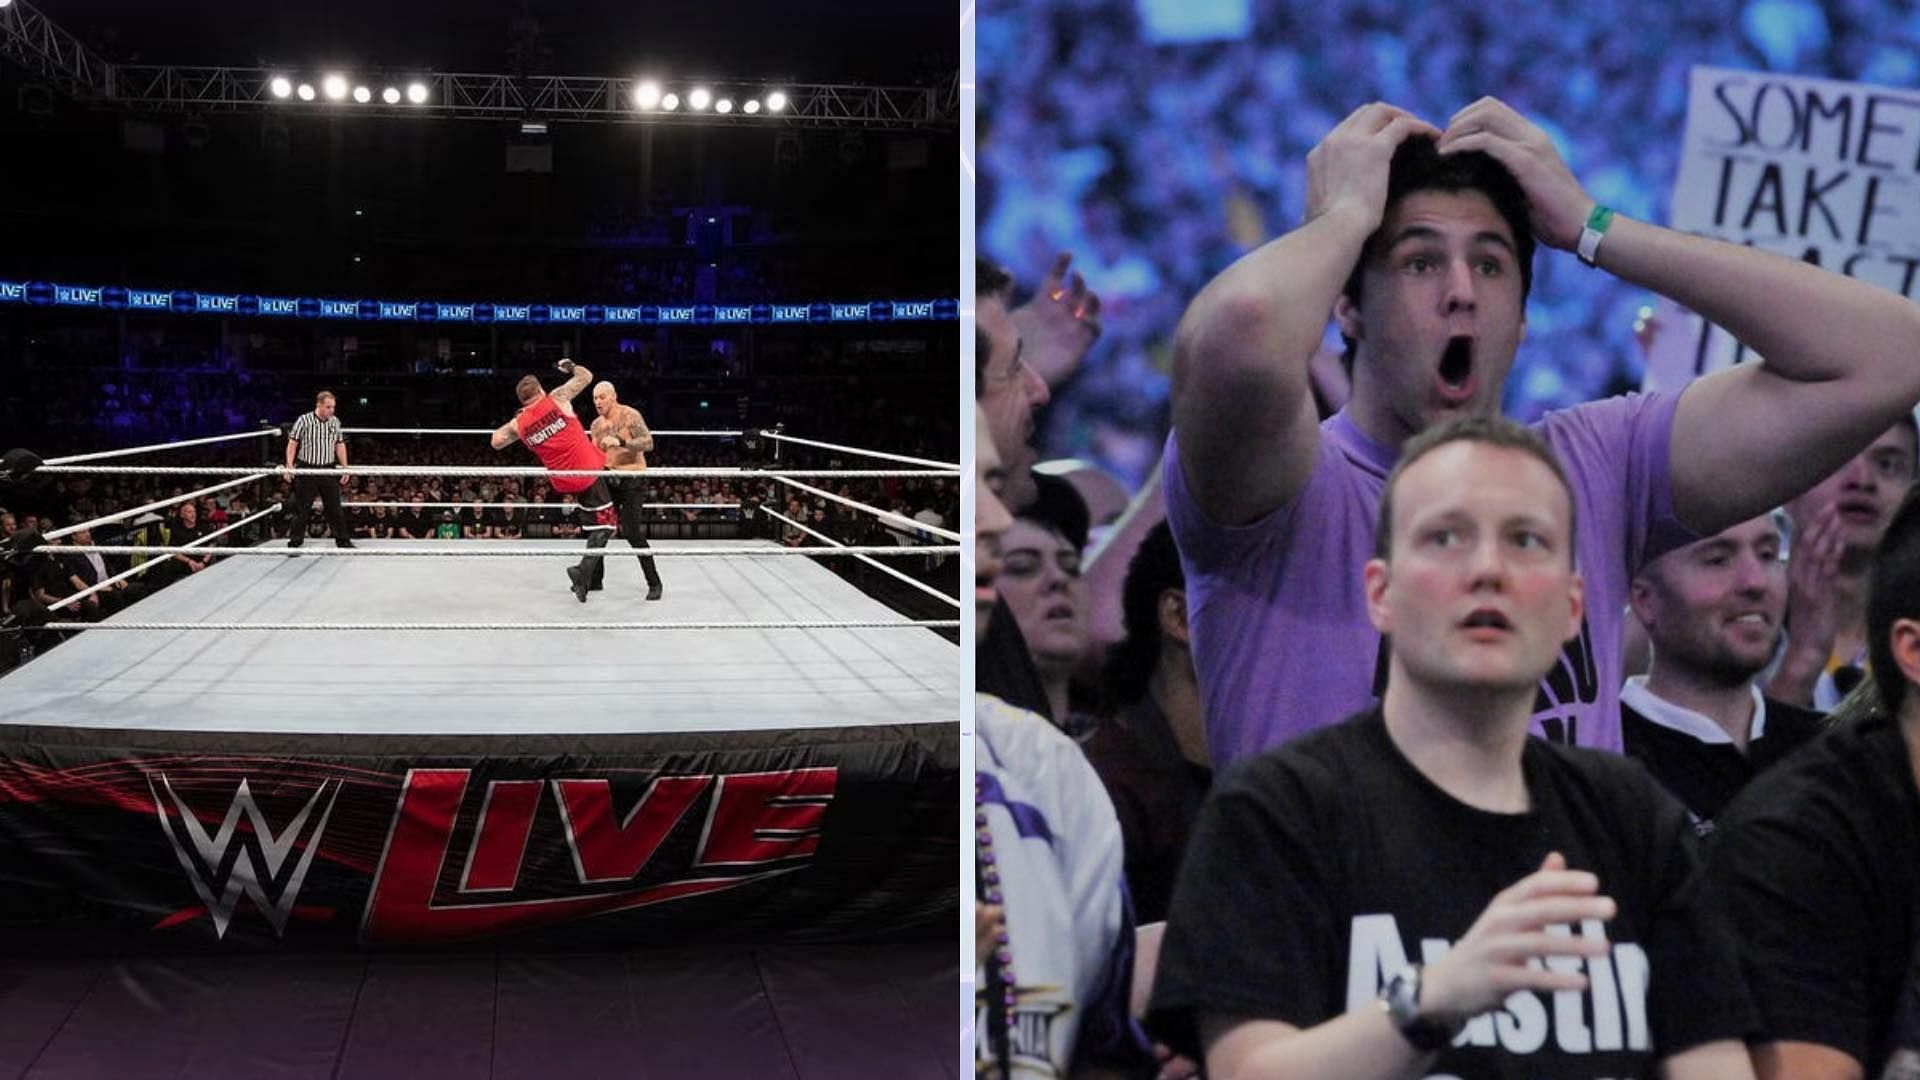 WWE Superstar recently suffered a shocking defeat